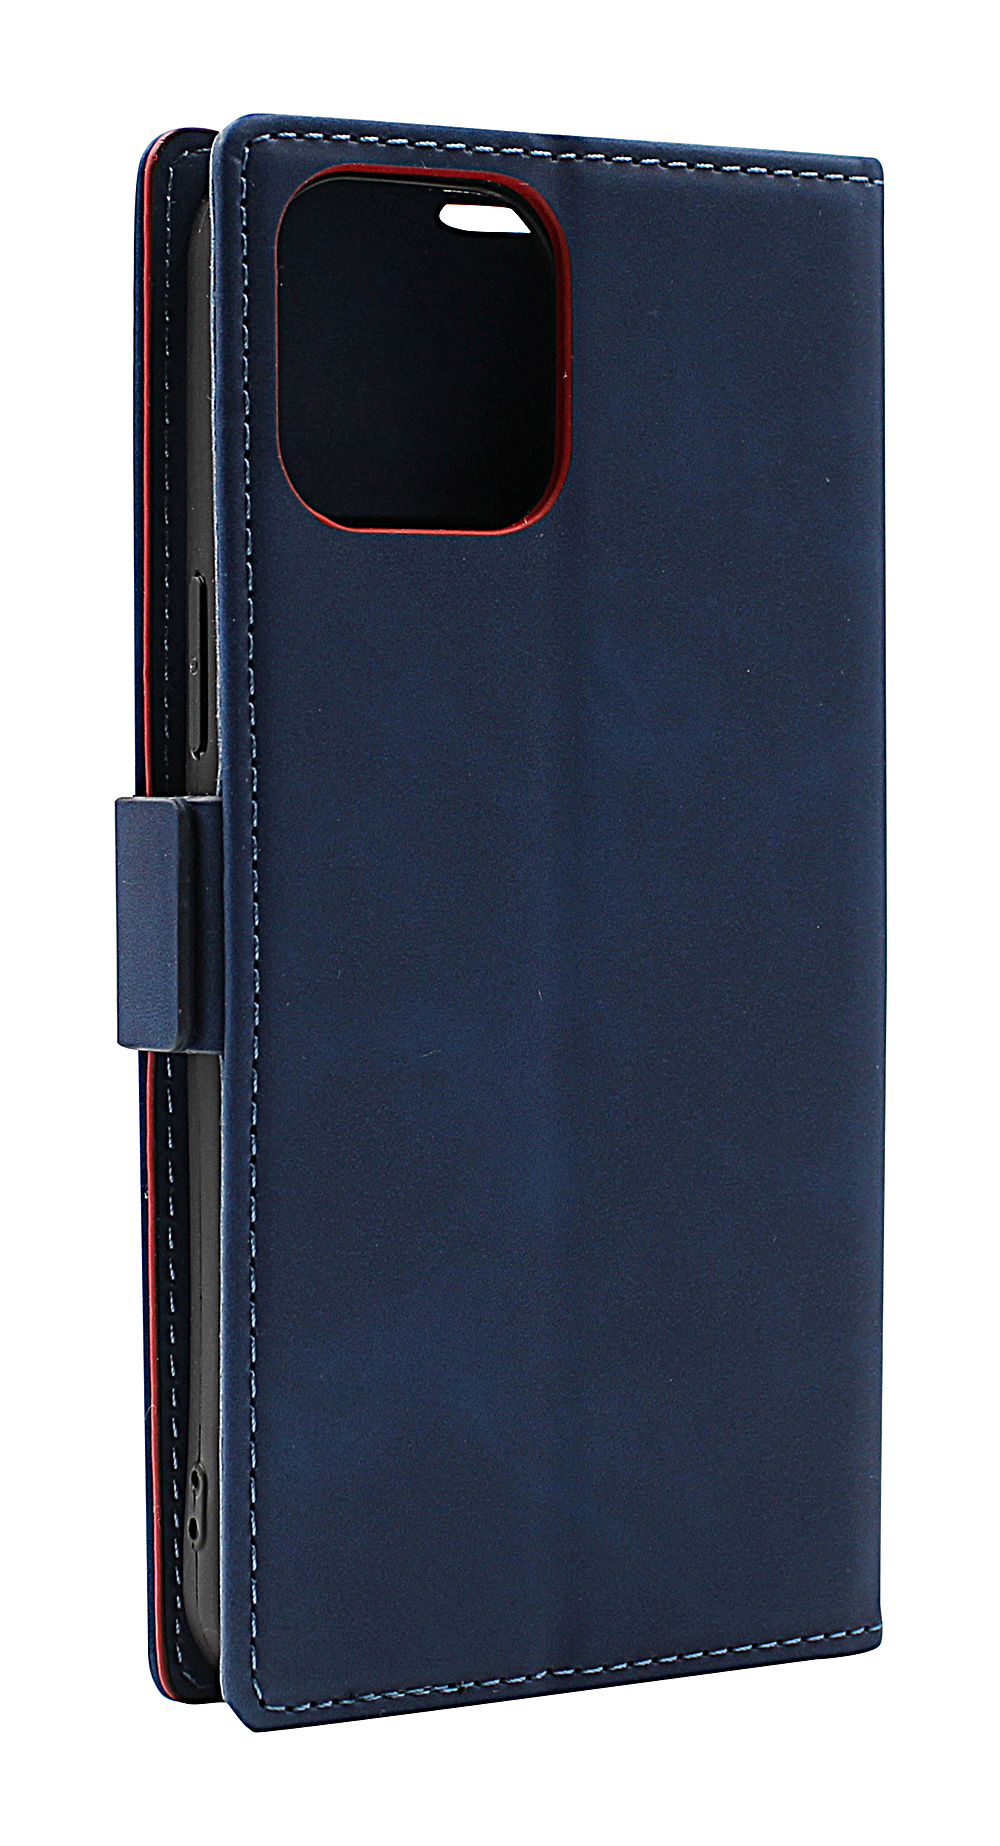 billigamobilskydd.seLyx Standcase Wallet iPhone 12 Pro Max (6.7)